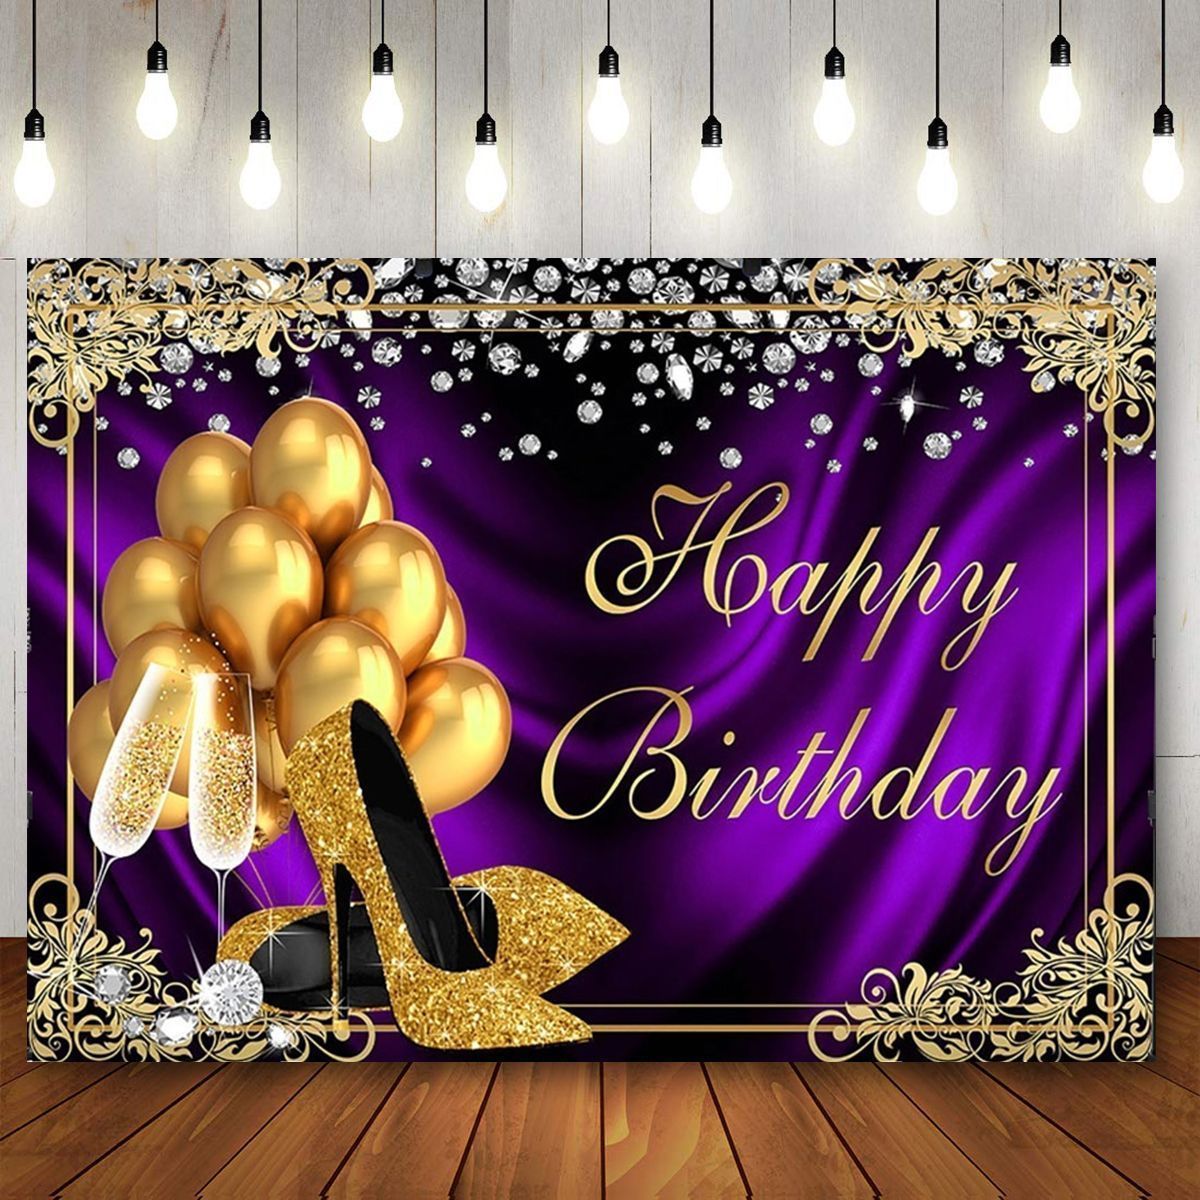 Glitter-Adult-Birthday-Party-Background-Photography-Cloth-Balloon-High-Heels-Diamond-Background-Phot-1759428